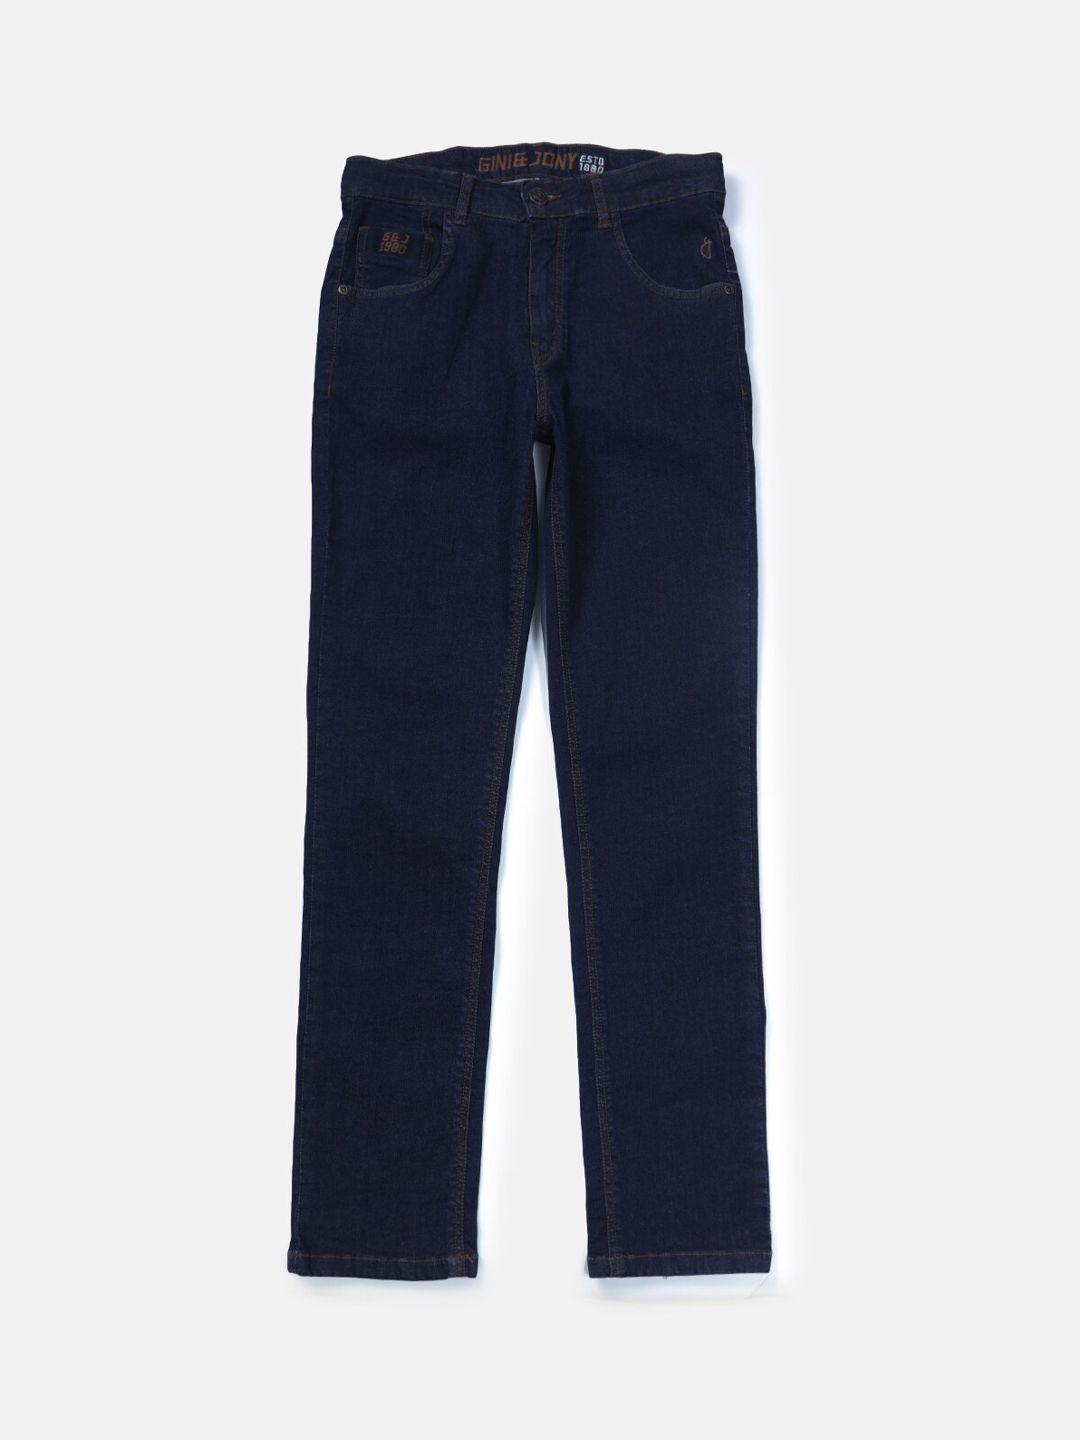 gini and jony boys navy blue straight fit jeans